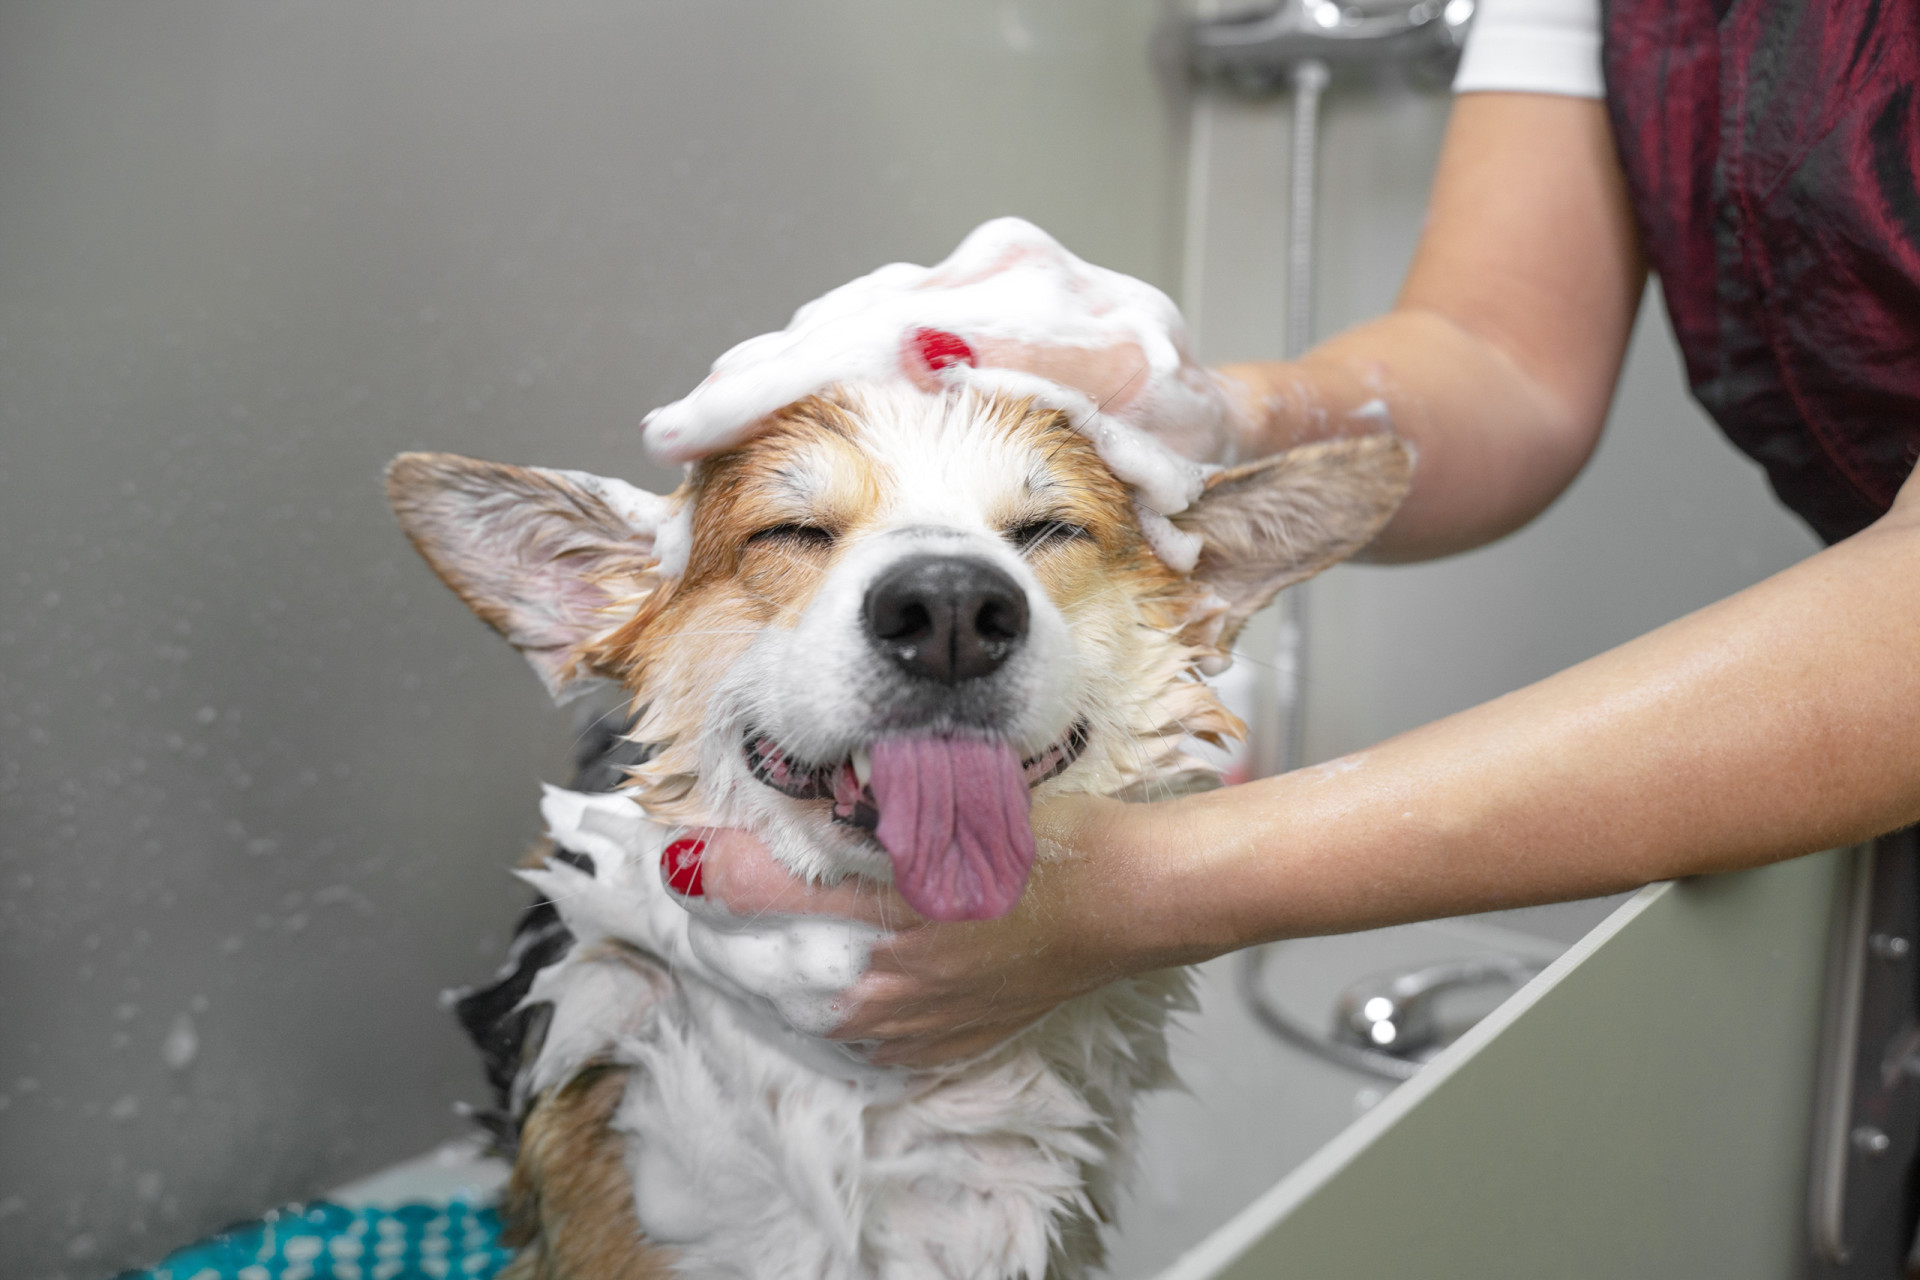 <p>With experience and qualifications, you could become self-employed and work from home or become a mobile dog groomer, visiting owners' homes. You could also open your own dog salon.</p><p>You may also like:<a href="https://www.starsinsider.com/n/189263?utm_source=msn.com&utm_medium=display&utm_campaign=referral_description&utm_content=670061en-en"> Who's who? These celebrities have the same name!</a></p>